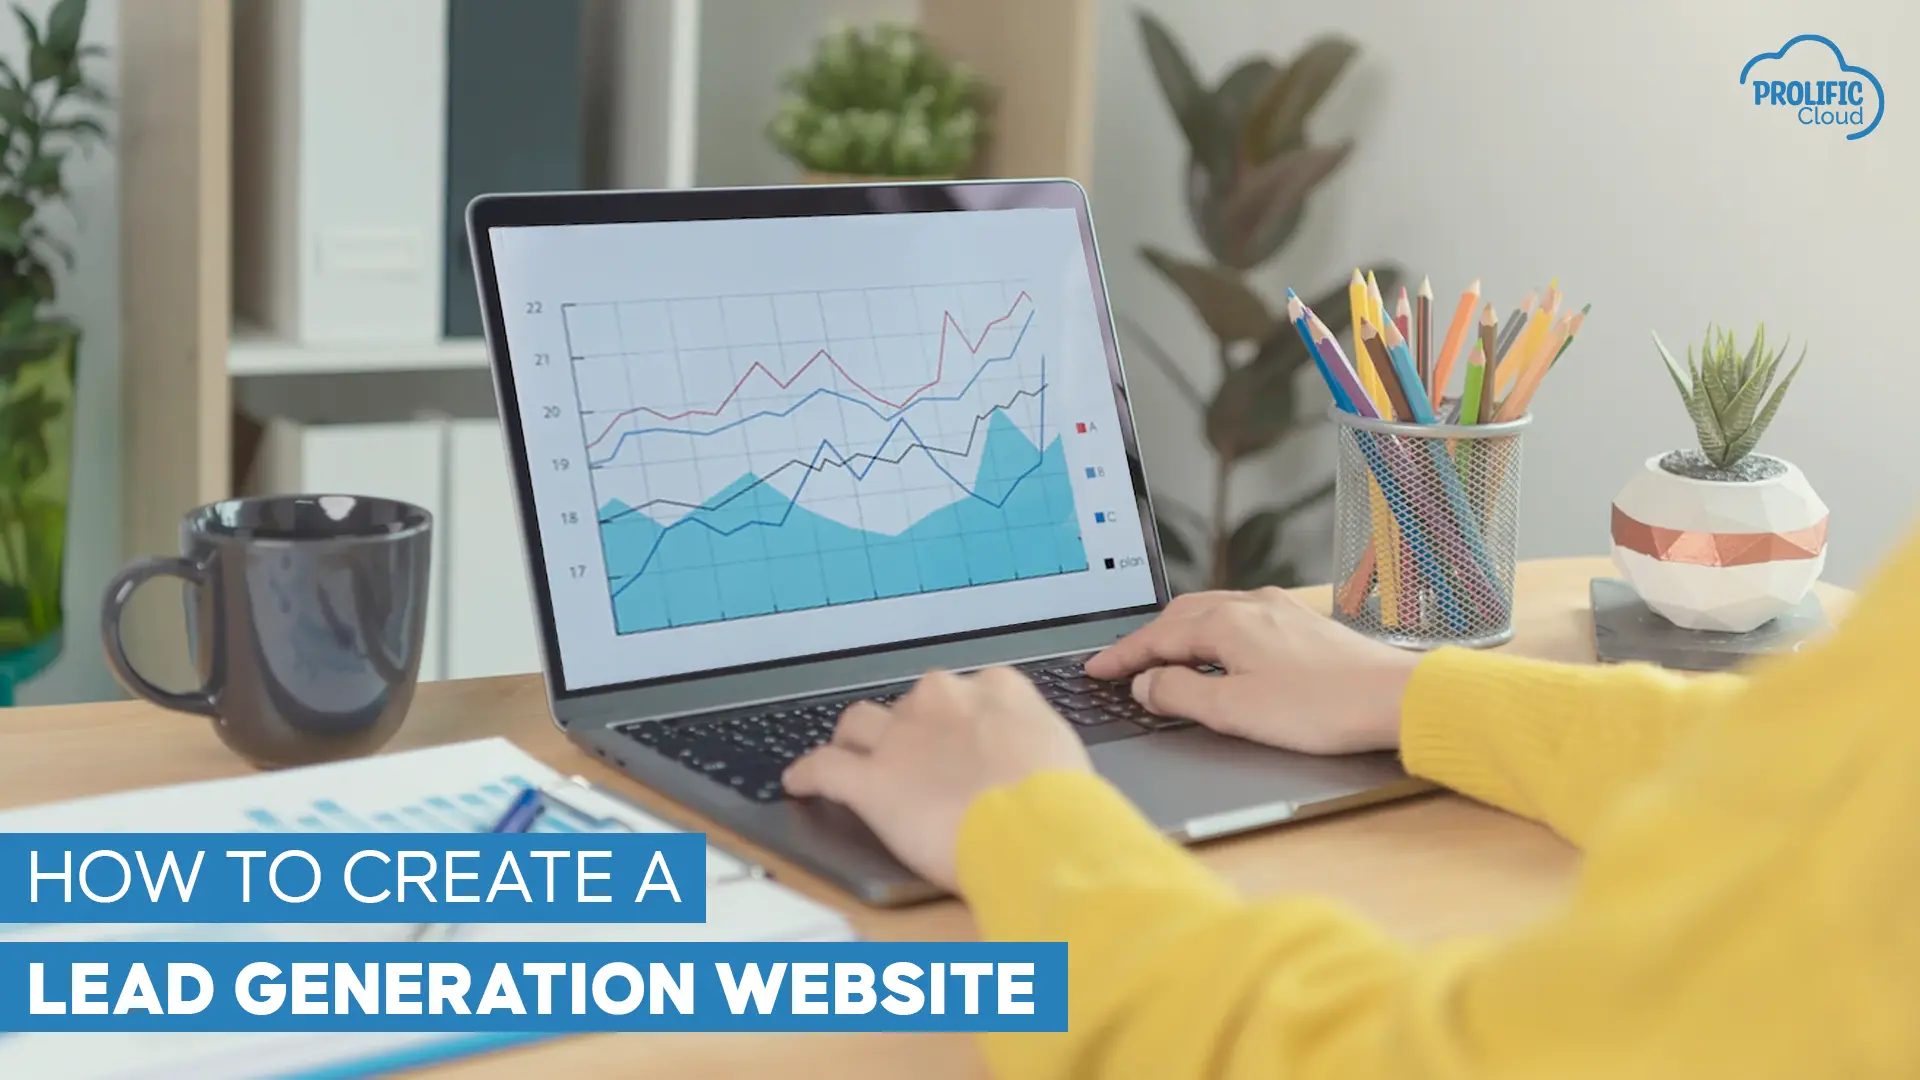 How to create a lead generation website